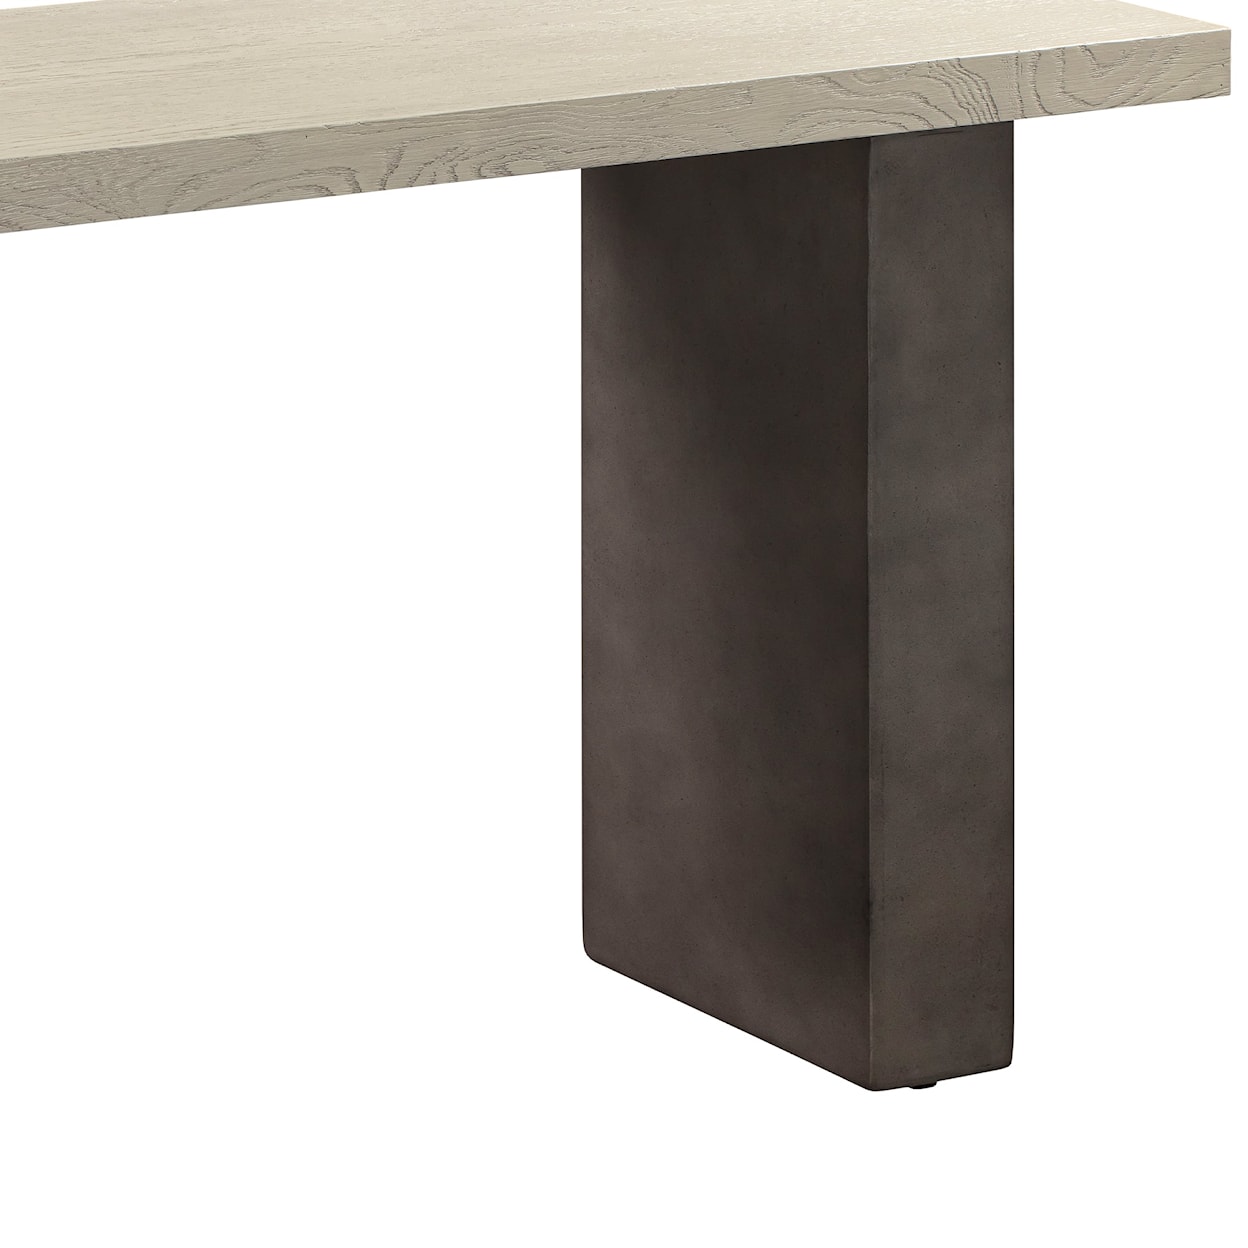 Armen Living Abbey Console Table